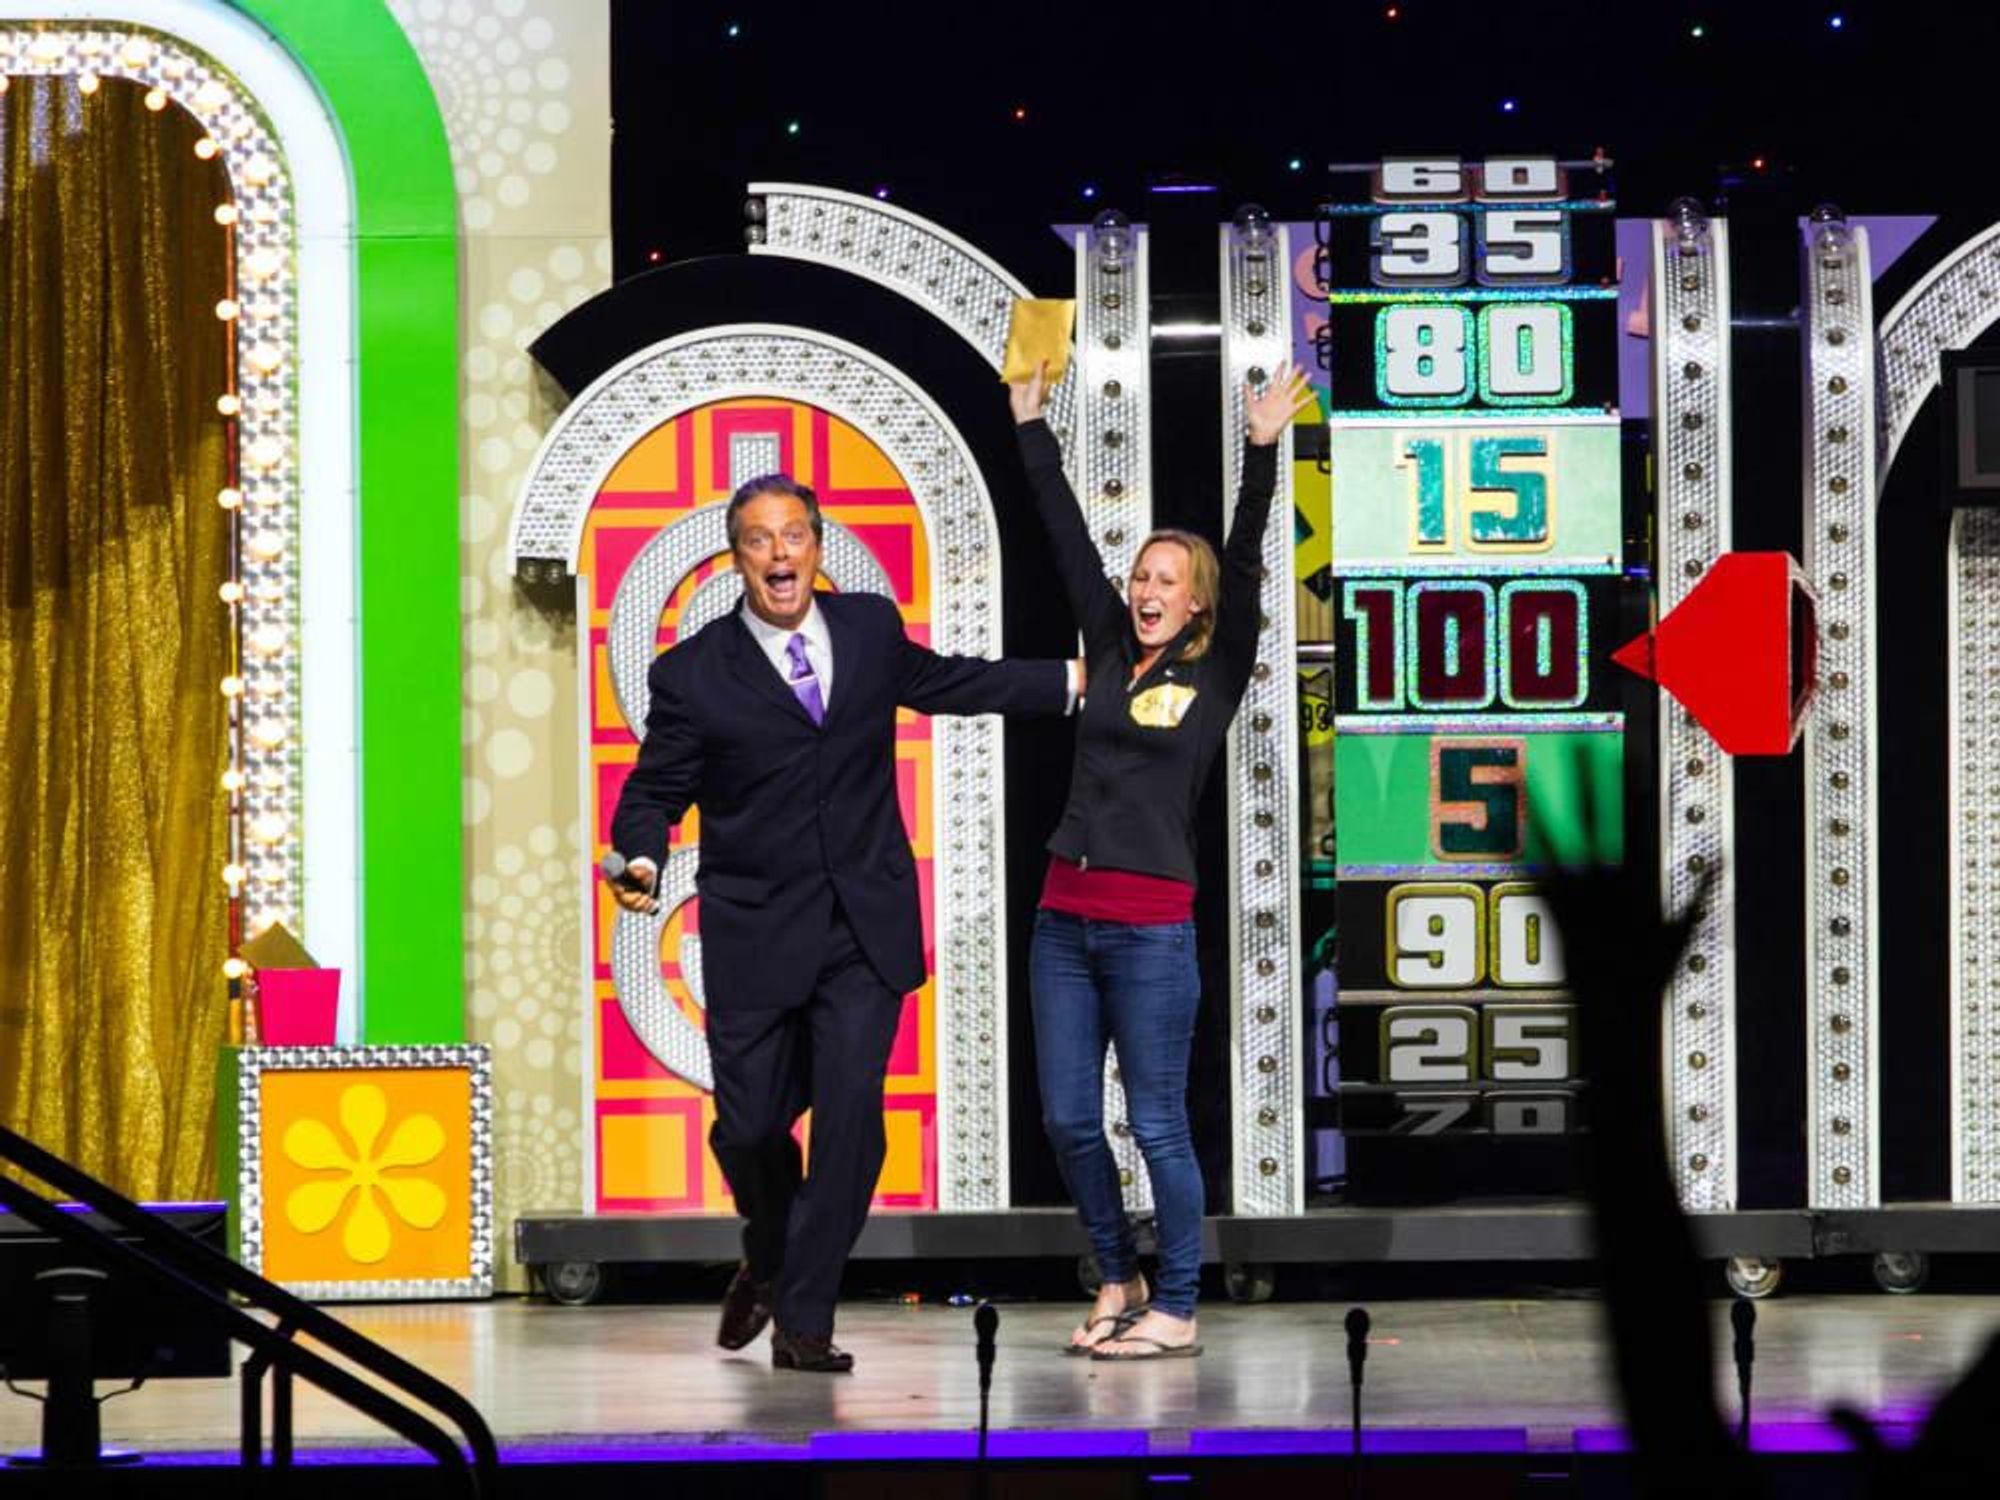 The Price Is Right Live